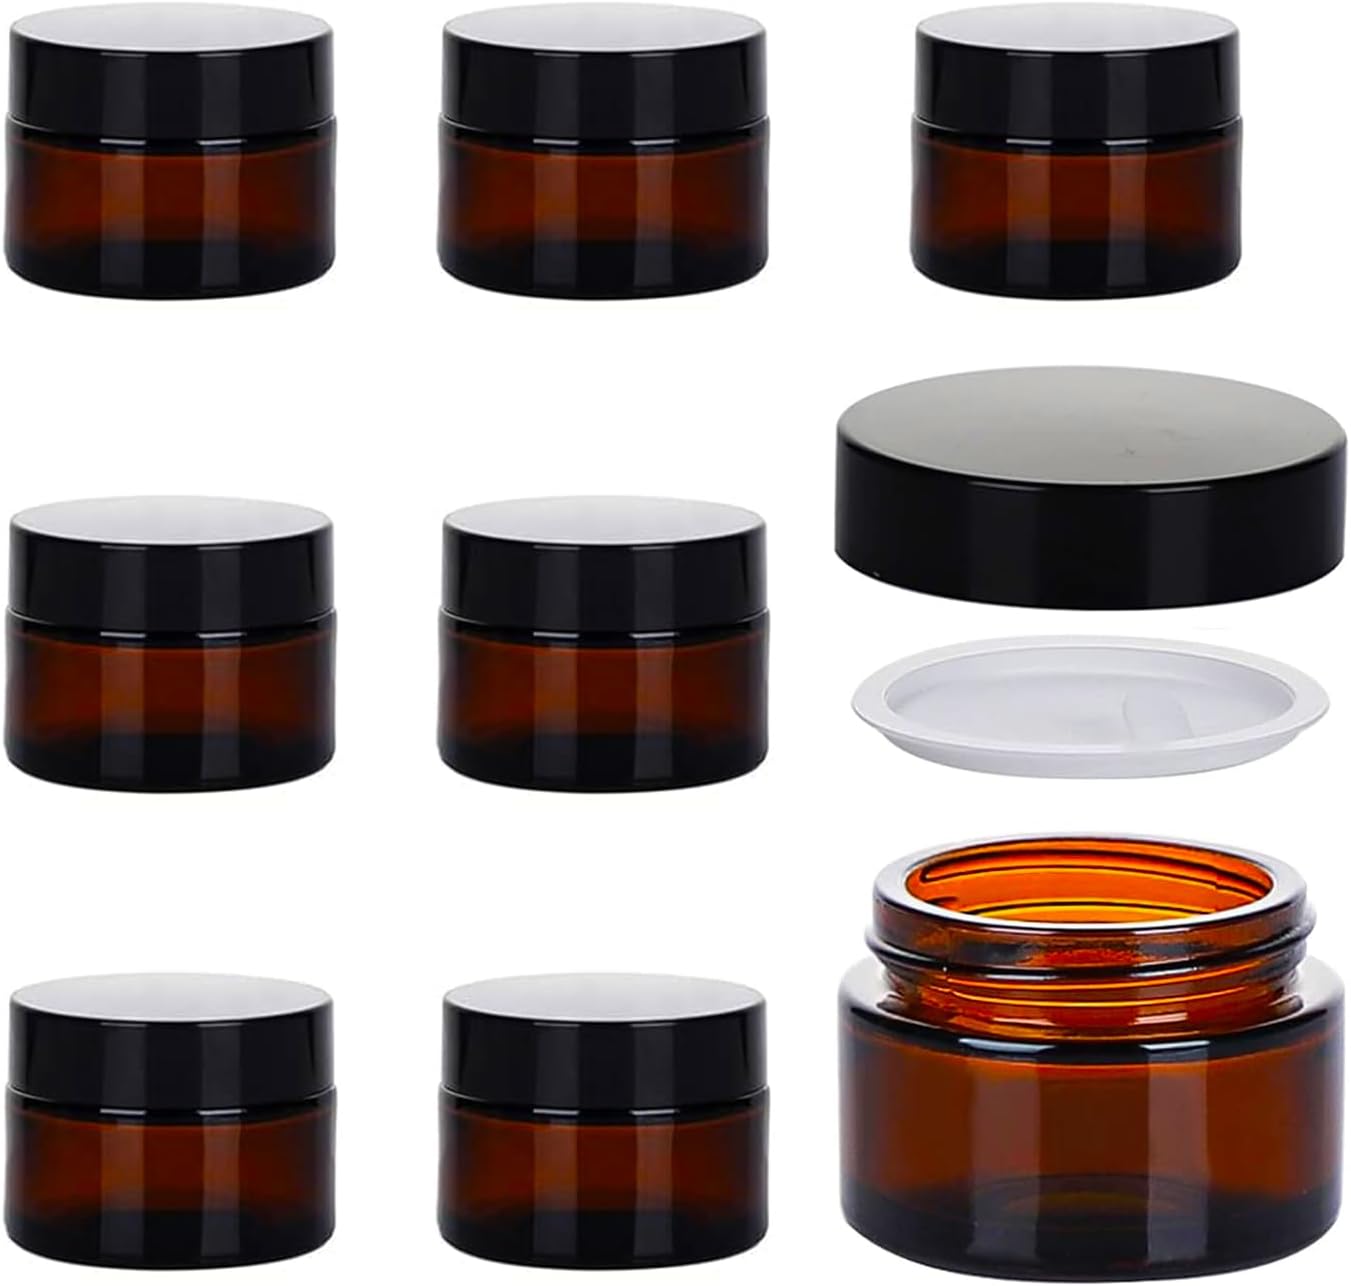 Tinted Glass Jars for Cosmetics Storage